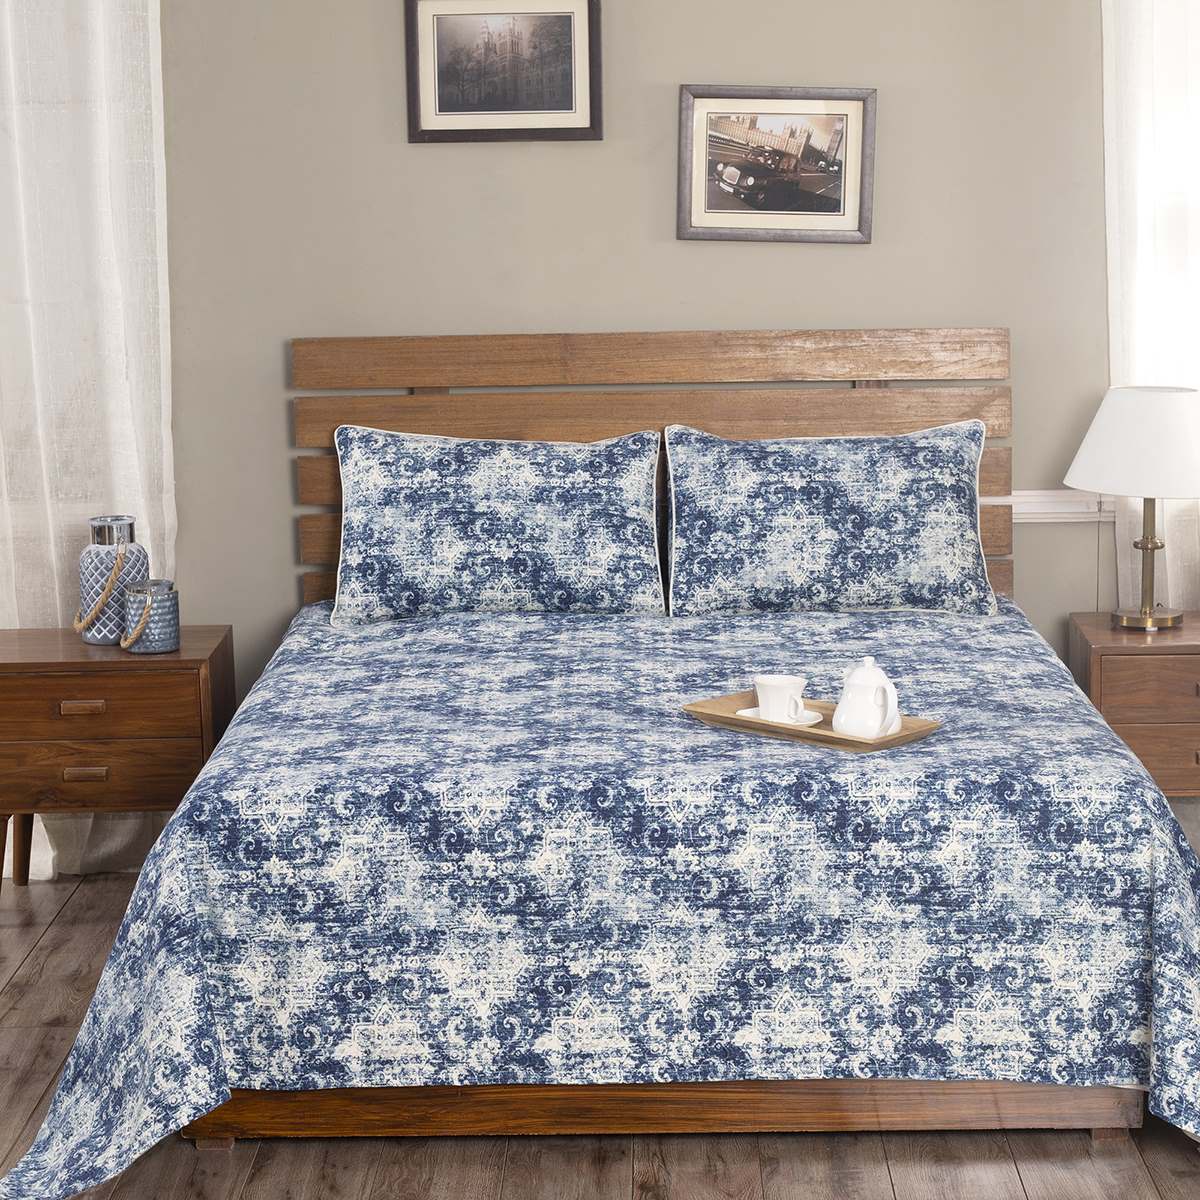 Rustic Clash Hyper Graphic Blue Printed 3 Pc Bed Cover Set